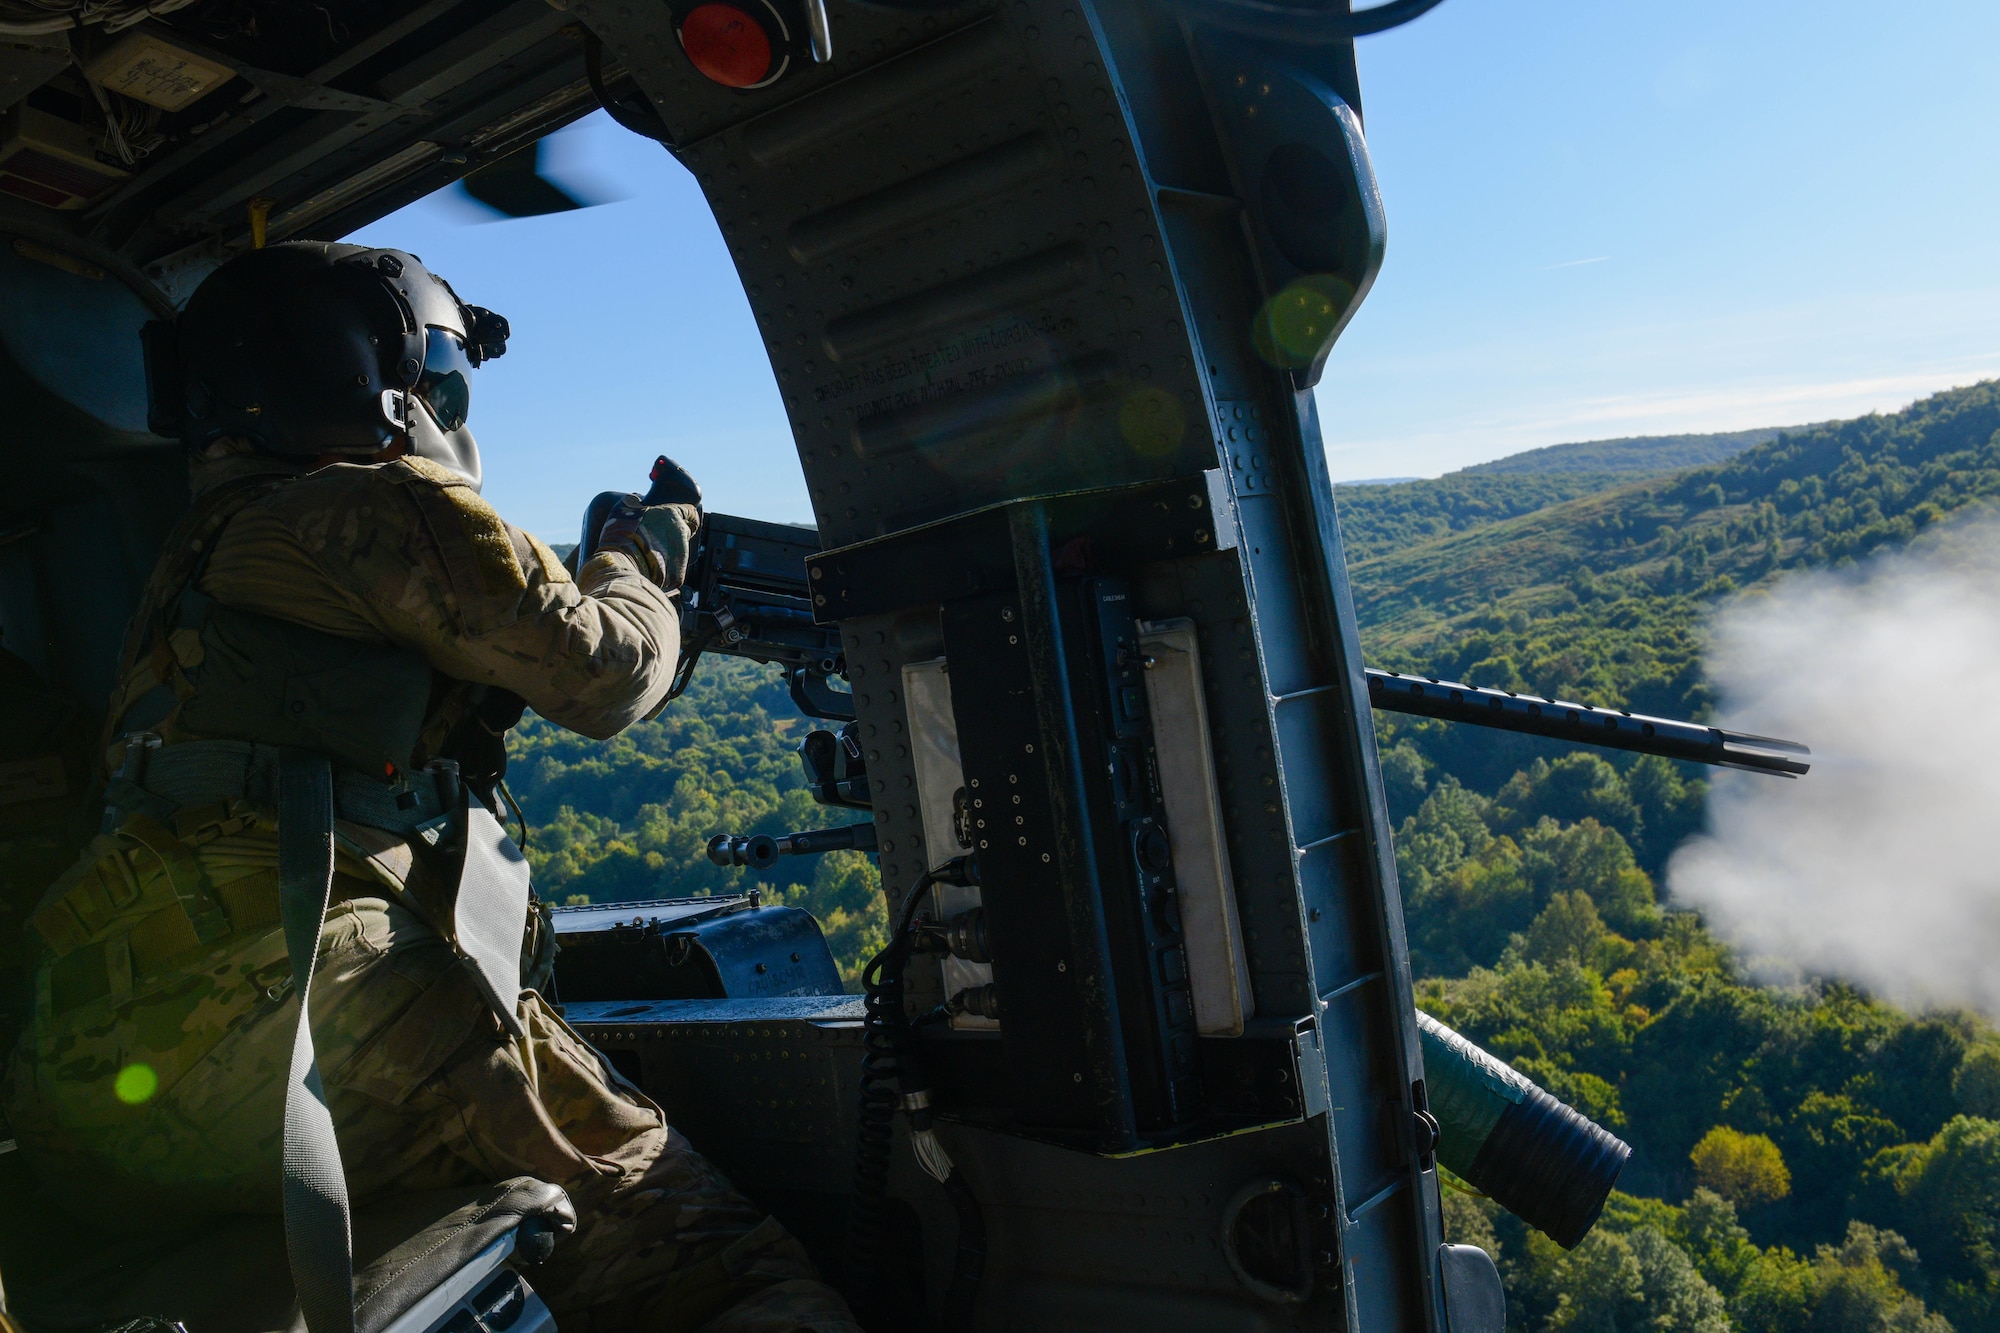 U.S. Air Force Staff Sgt. Kinga Hudson, 56th Rescue Squadron special missions aviator, performs training during a training sortie in Croatia Sept. 23, 2021. The HH-60G A6212 helicopter completed its final sortie before retirement and three crew members completed .50 caliber and mini gun training during the sortie. (U.S. Air Force photo by Senior Airman Brooke Moeder)